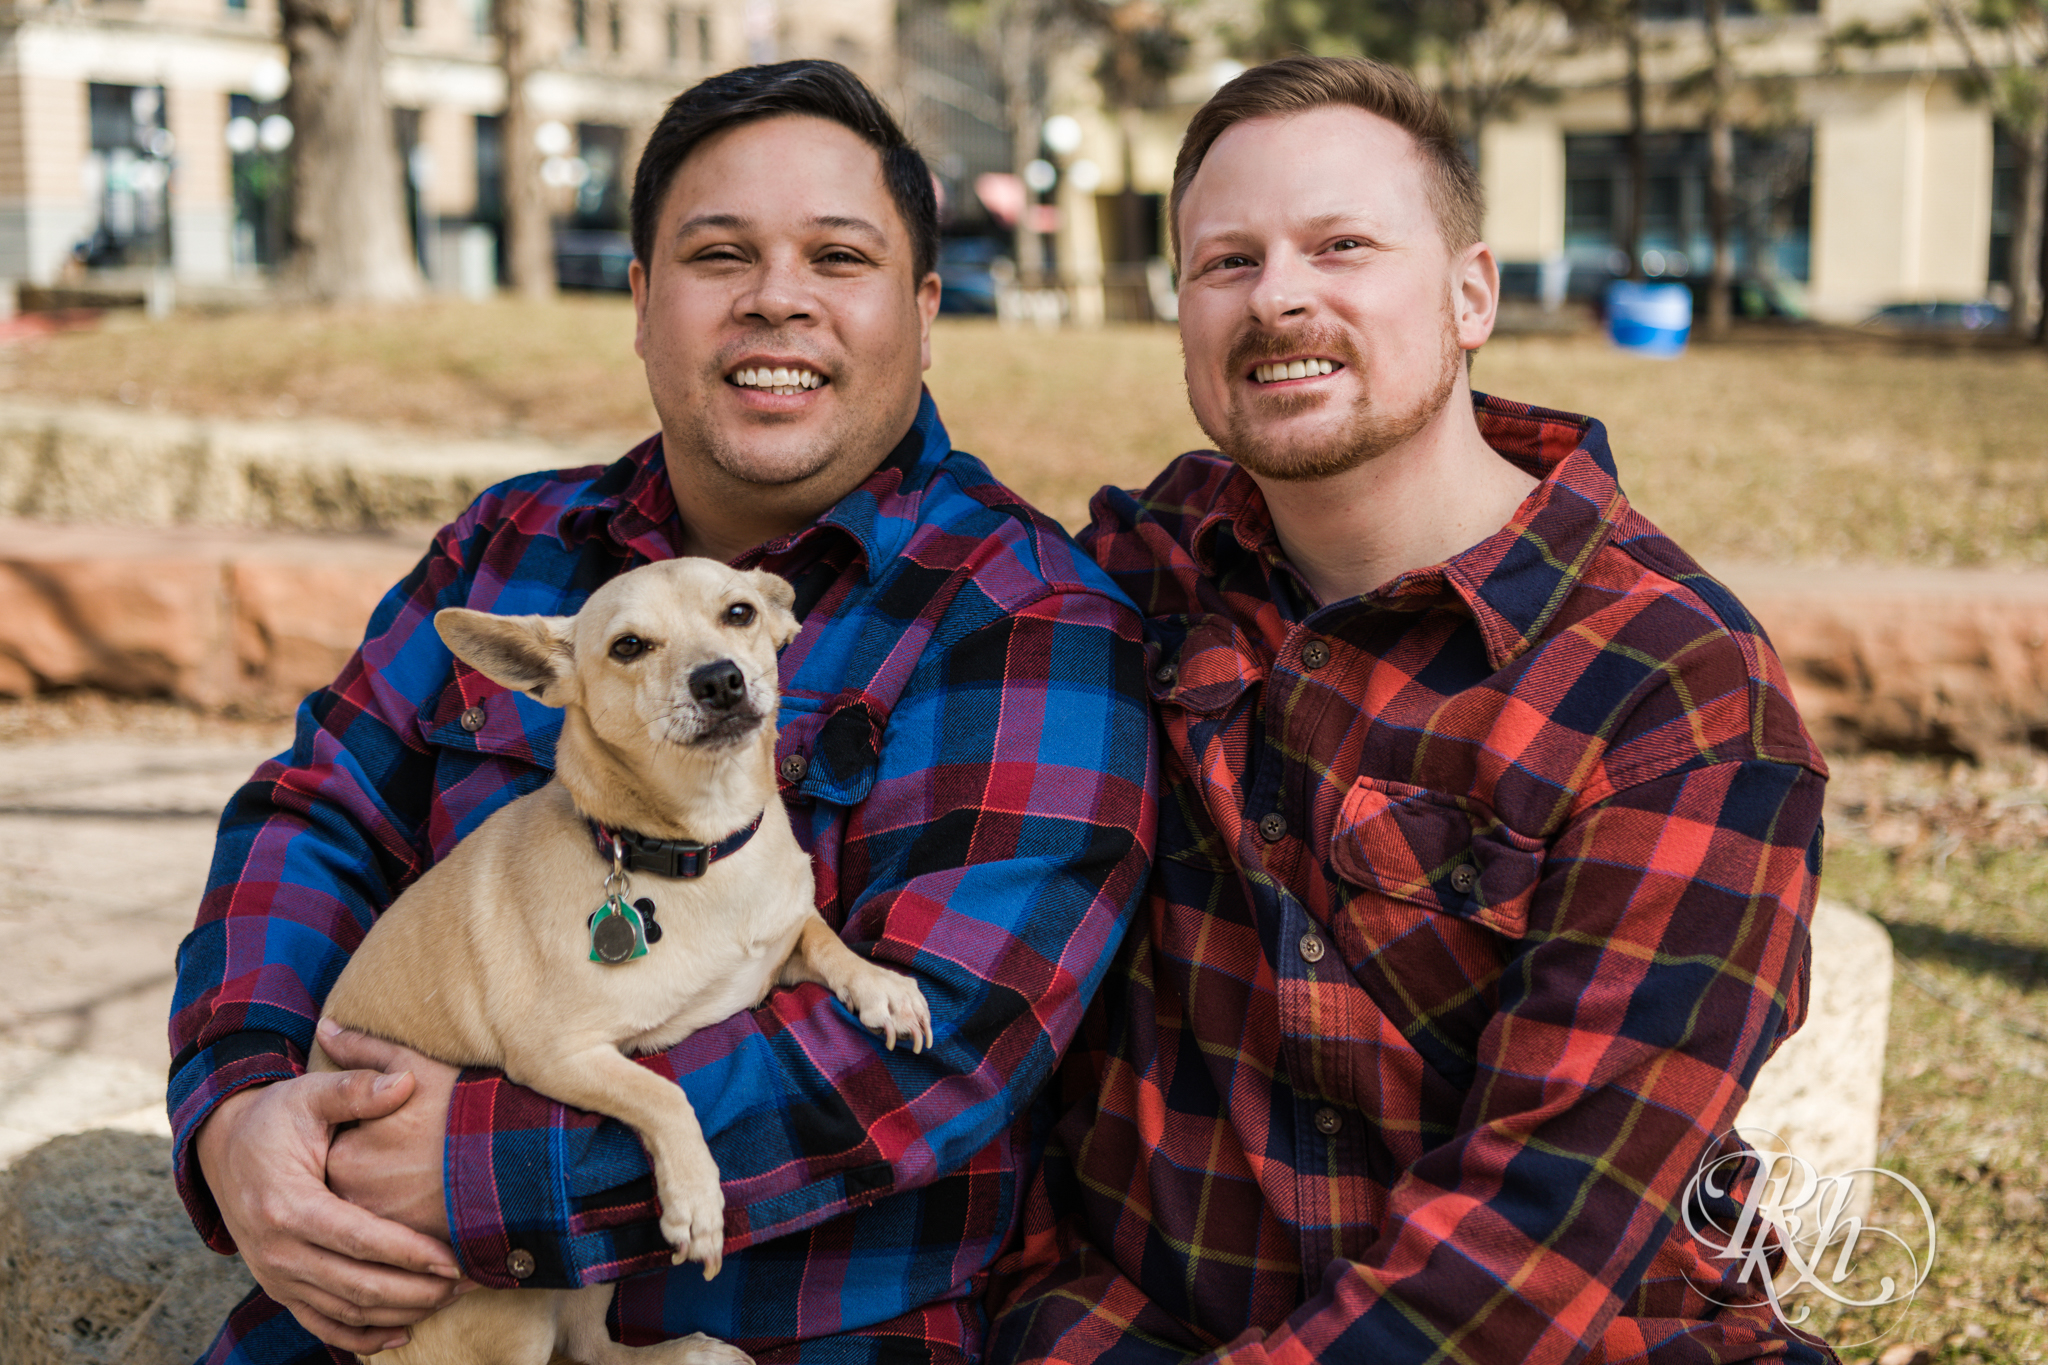 Two gay men in flannels smile while holding a Chihuahua in Saint Paul, Minnesota.